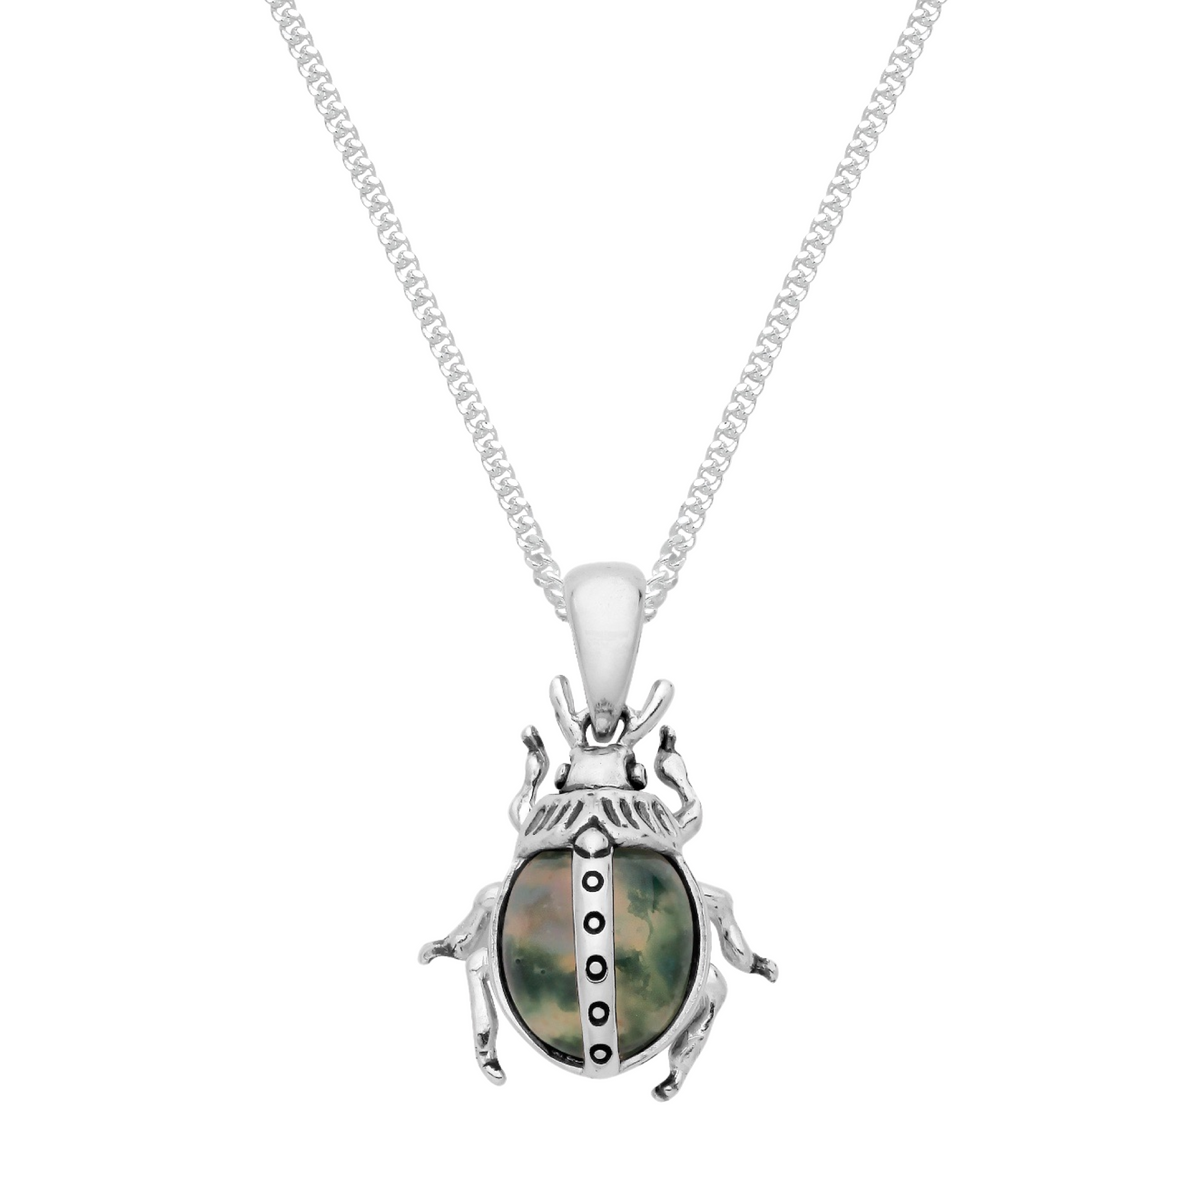 THE BEETLE - Sterling Silver & Moss Agate Necklace